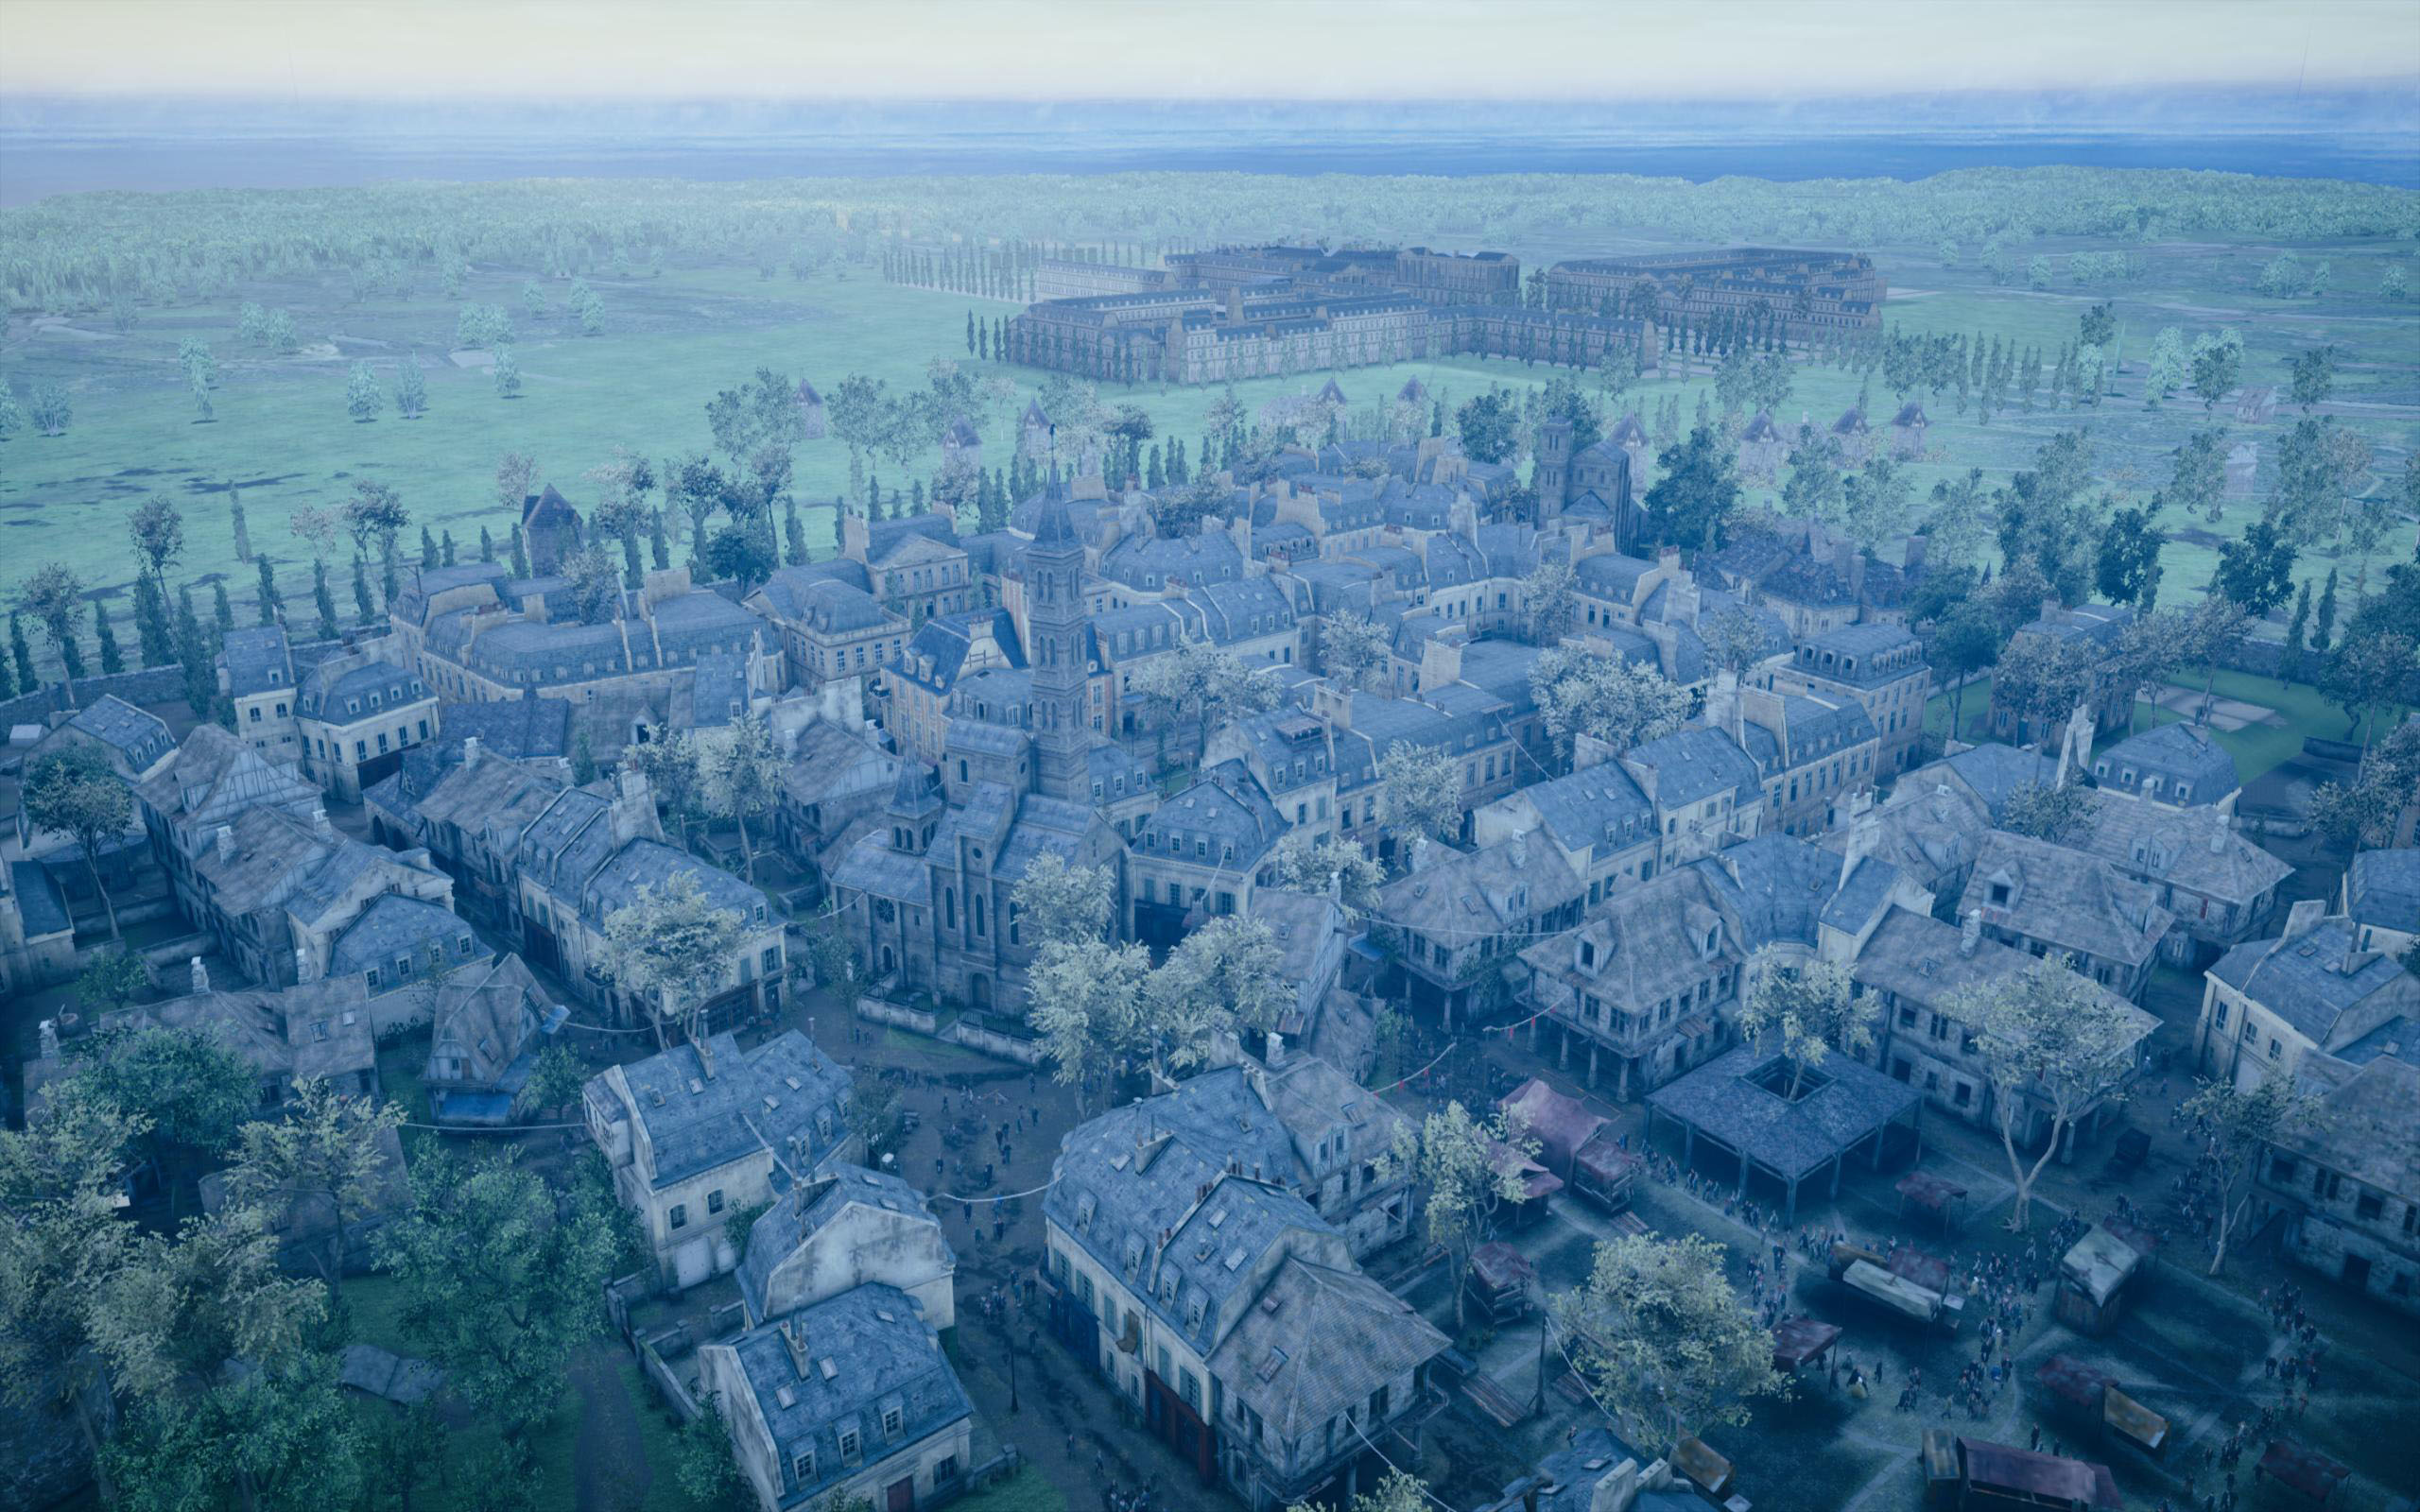 Assassin’s Creed: Unity – Performance and IQ Analysis featuring MFAA